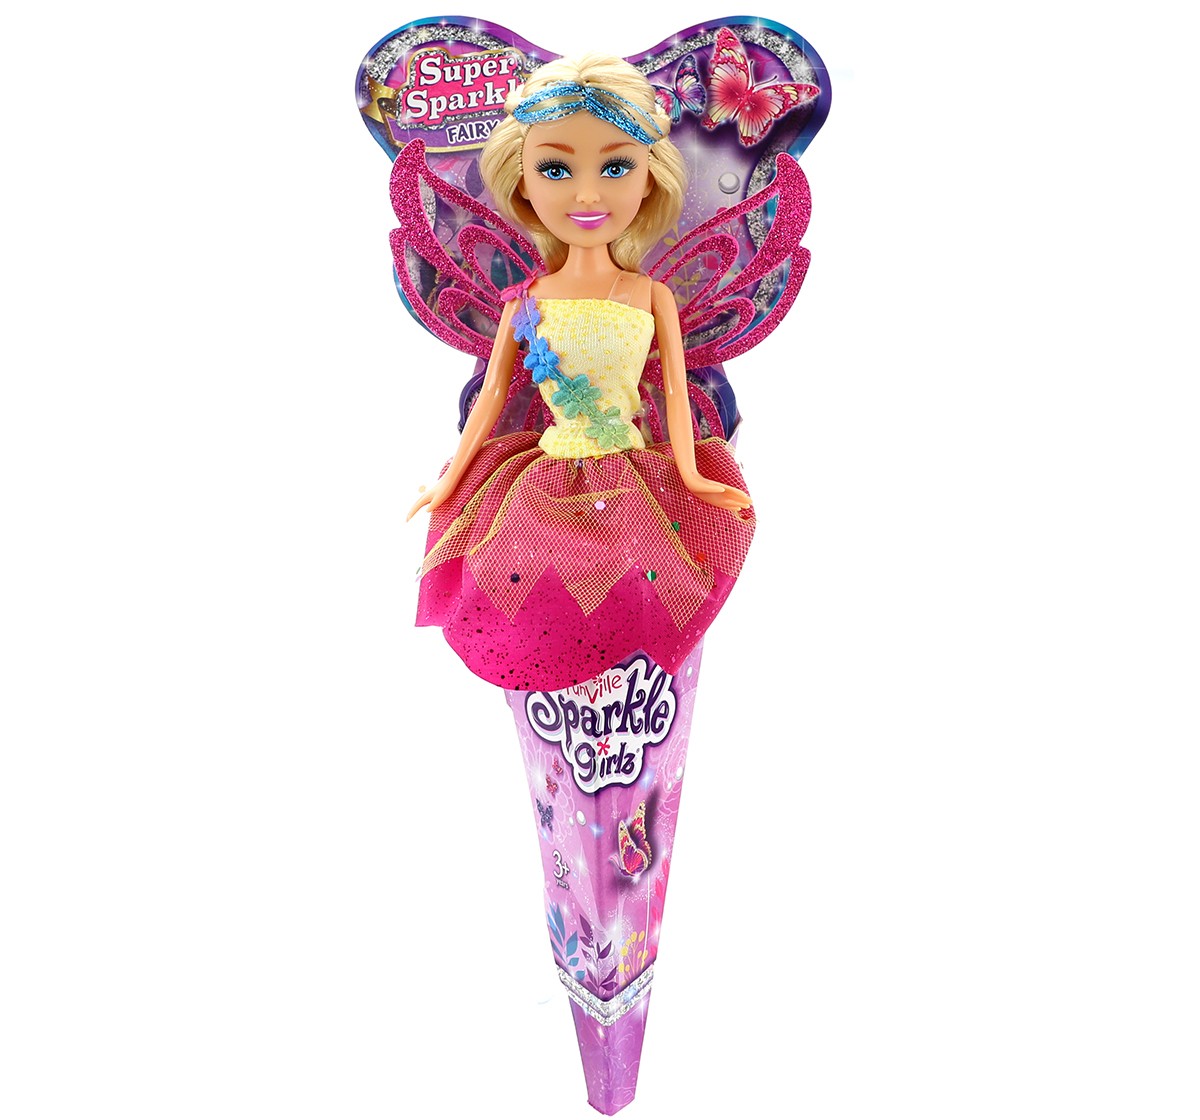 Sparkle Girlz 10"Cone Fairy for Dolls & Accessories for Kids Age 3Y+